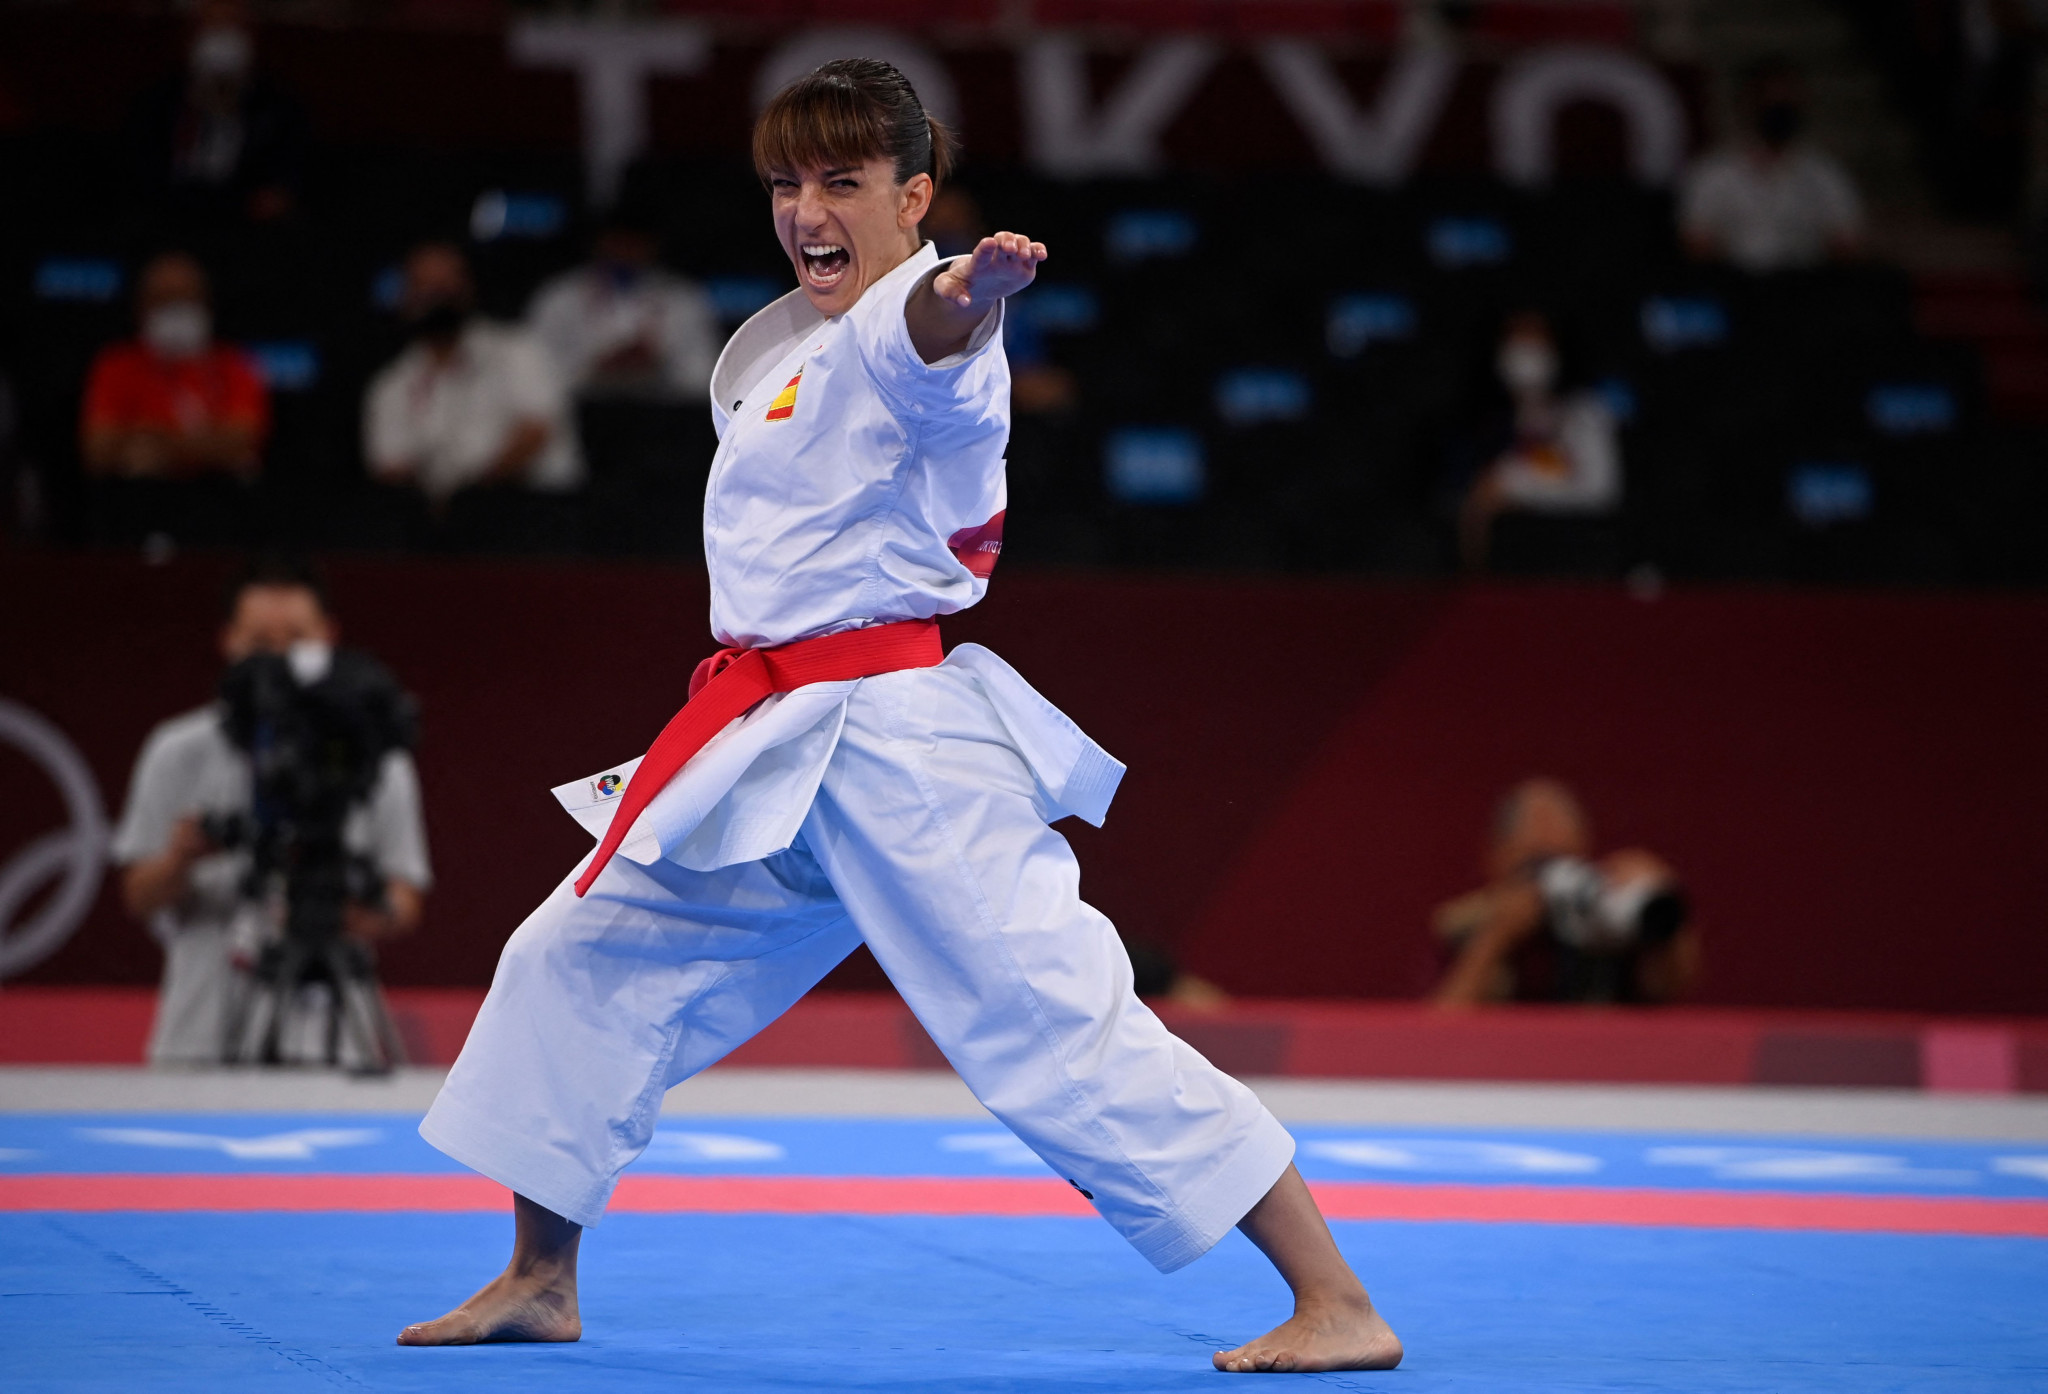 Sandra Sánchez of Spain won the women's kata event in Gaziantep ©Getty Images